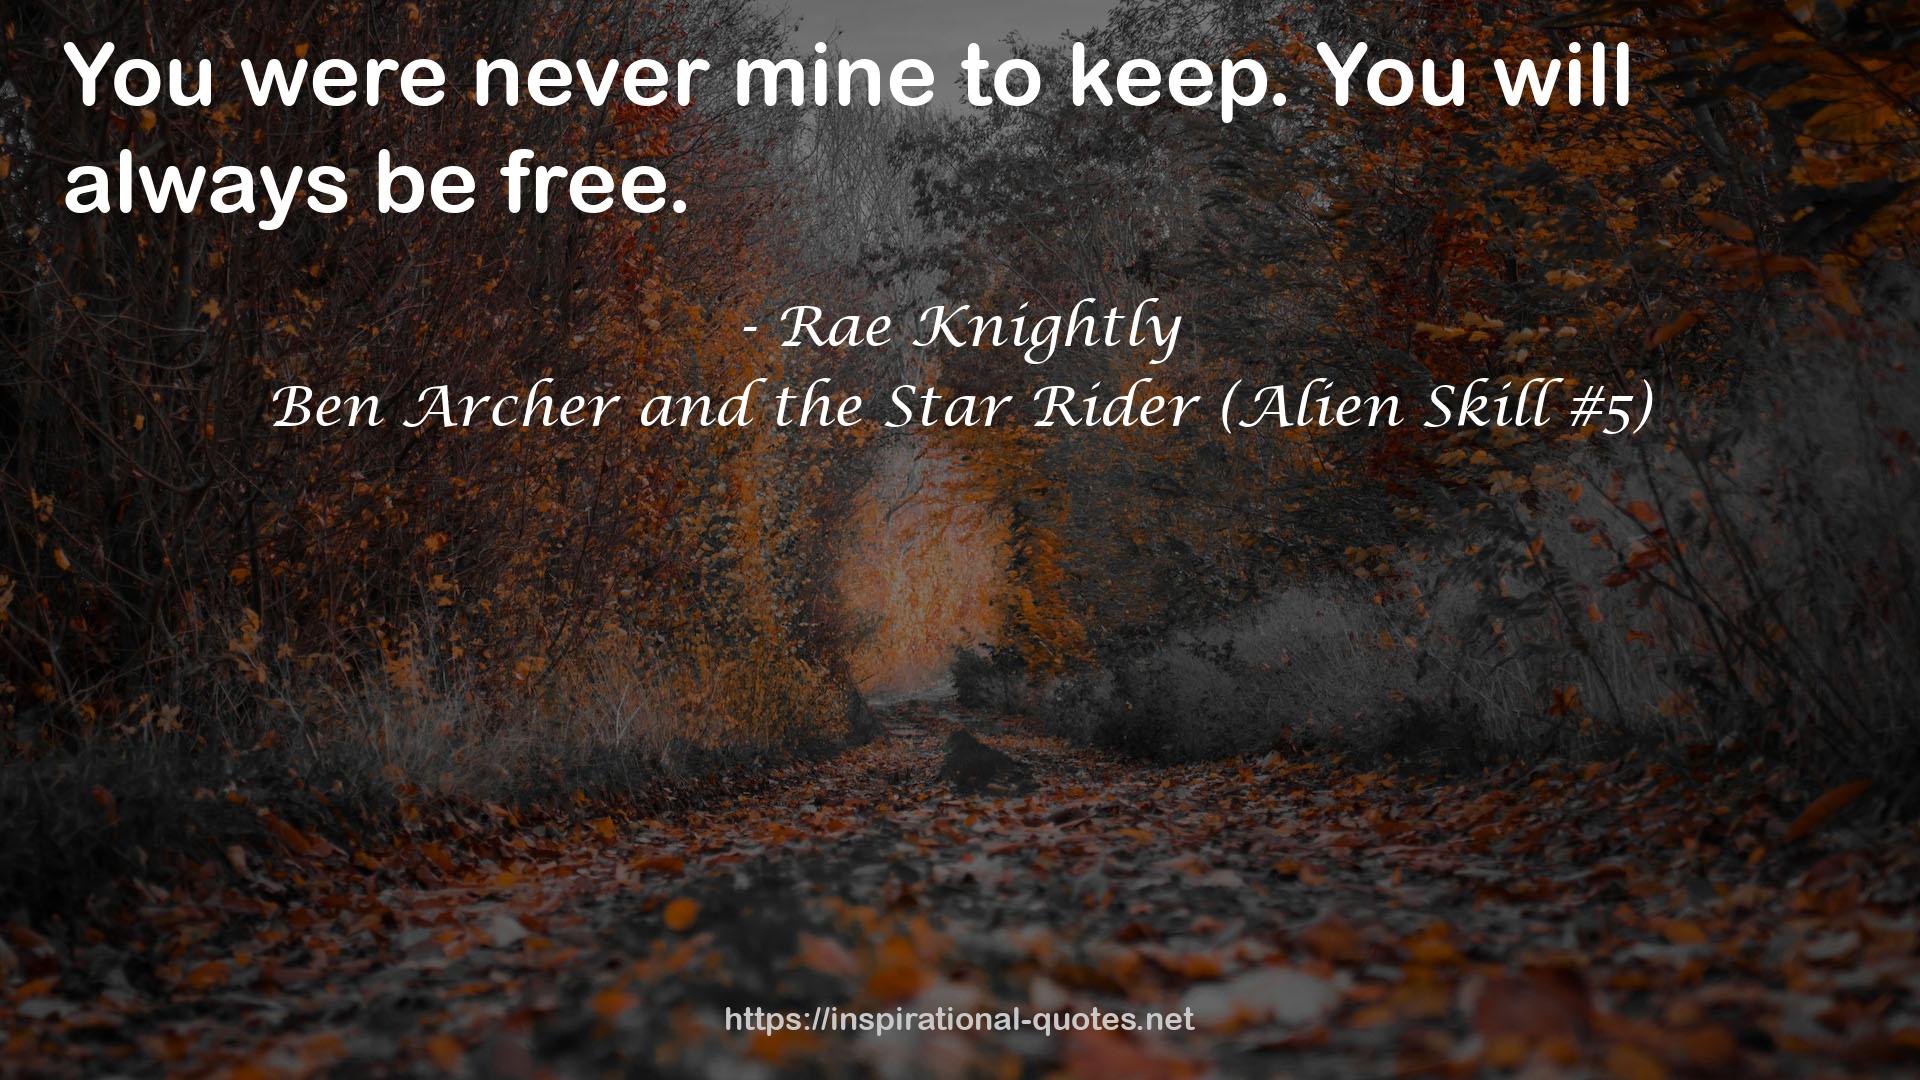 Ben Archer and the Star Rider (Alien Skill #5) QUOTES